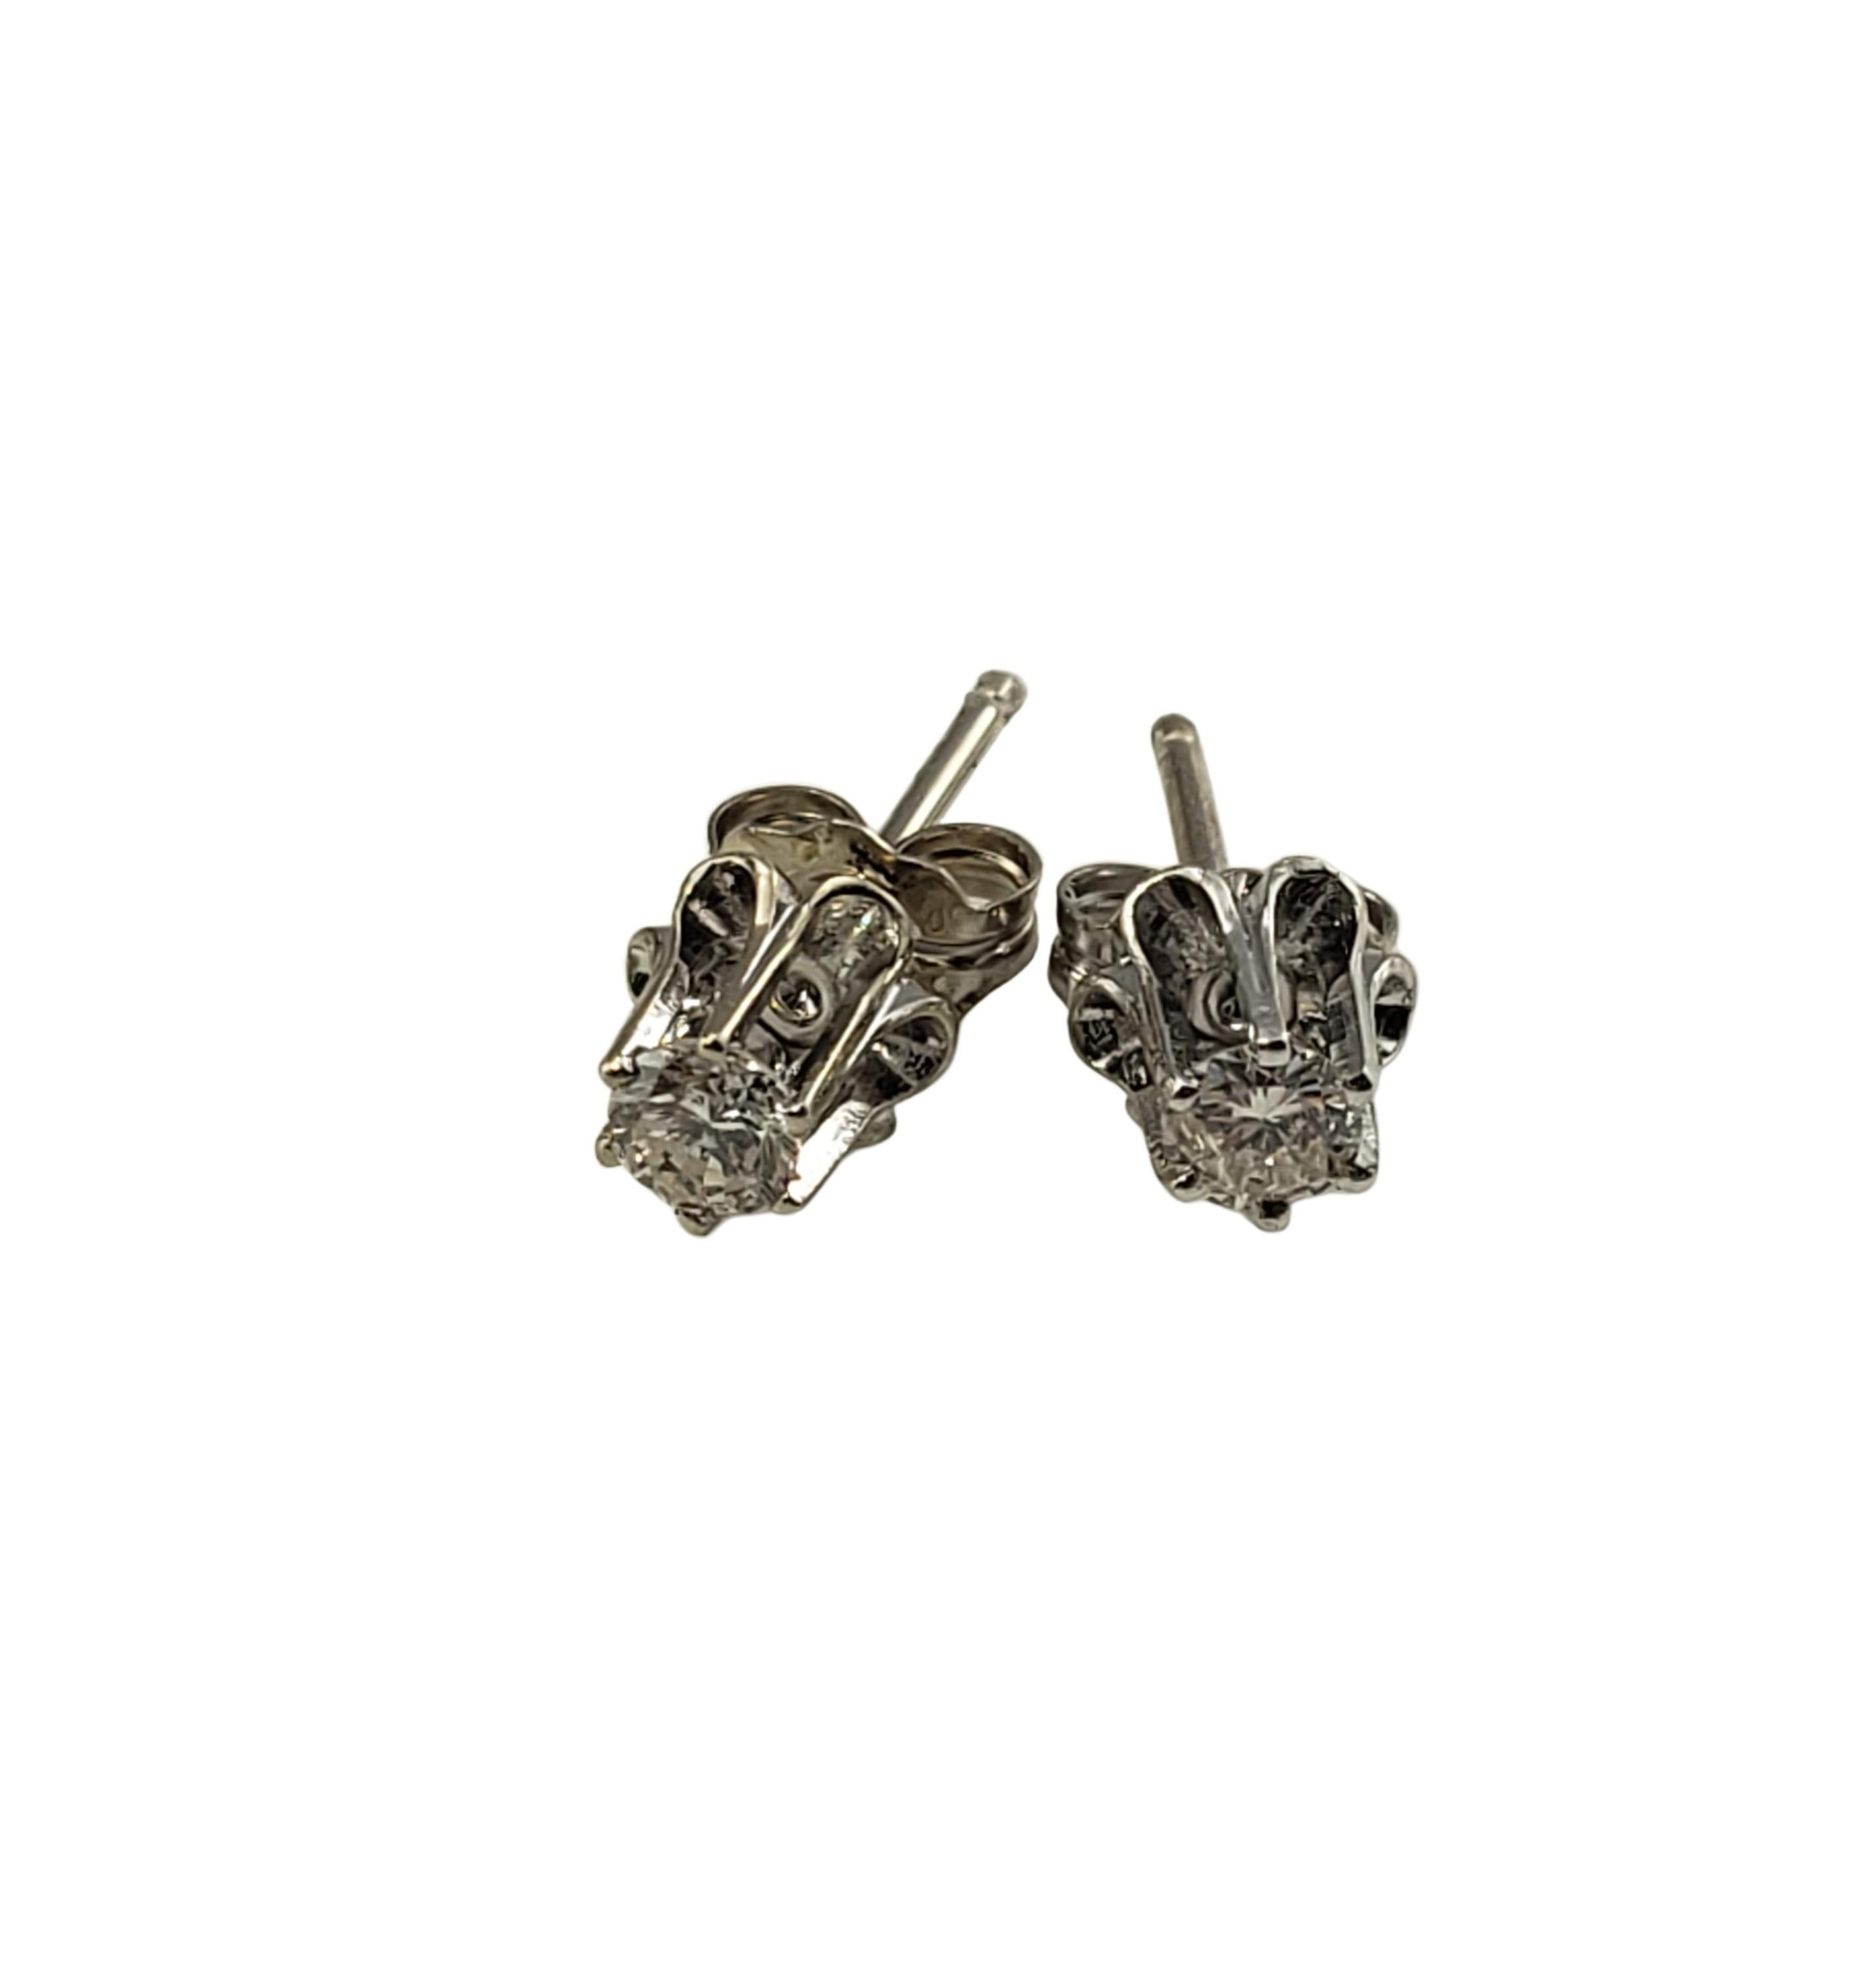 Vintage 14 Karat White Gold Diamond Stud Earrings .16 TCW-

These sparkling earrings each feature one round brilliant cut diamond set in classic 14K white gold.  Push back closures.

Approximate total diamond weight:  .16 ct.

Diamond color: